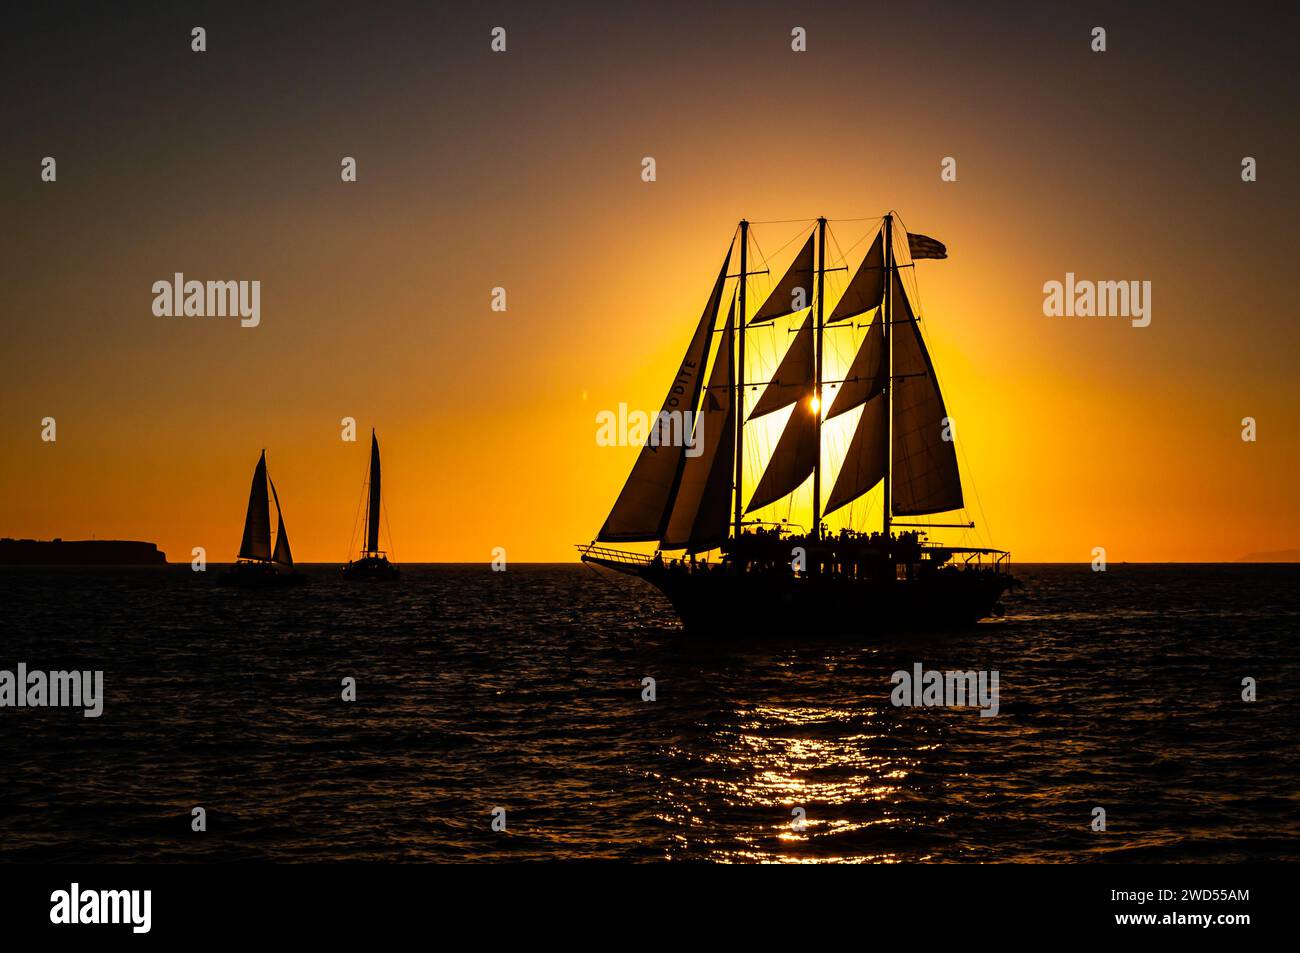 An orange-hued sunset casts a warm glow on the silhouette of several sailboats gliding across the calm surface of the water Stock Photo